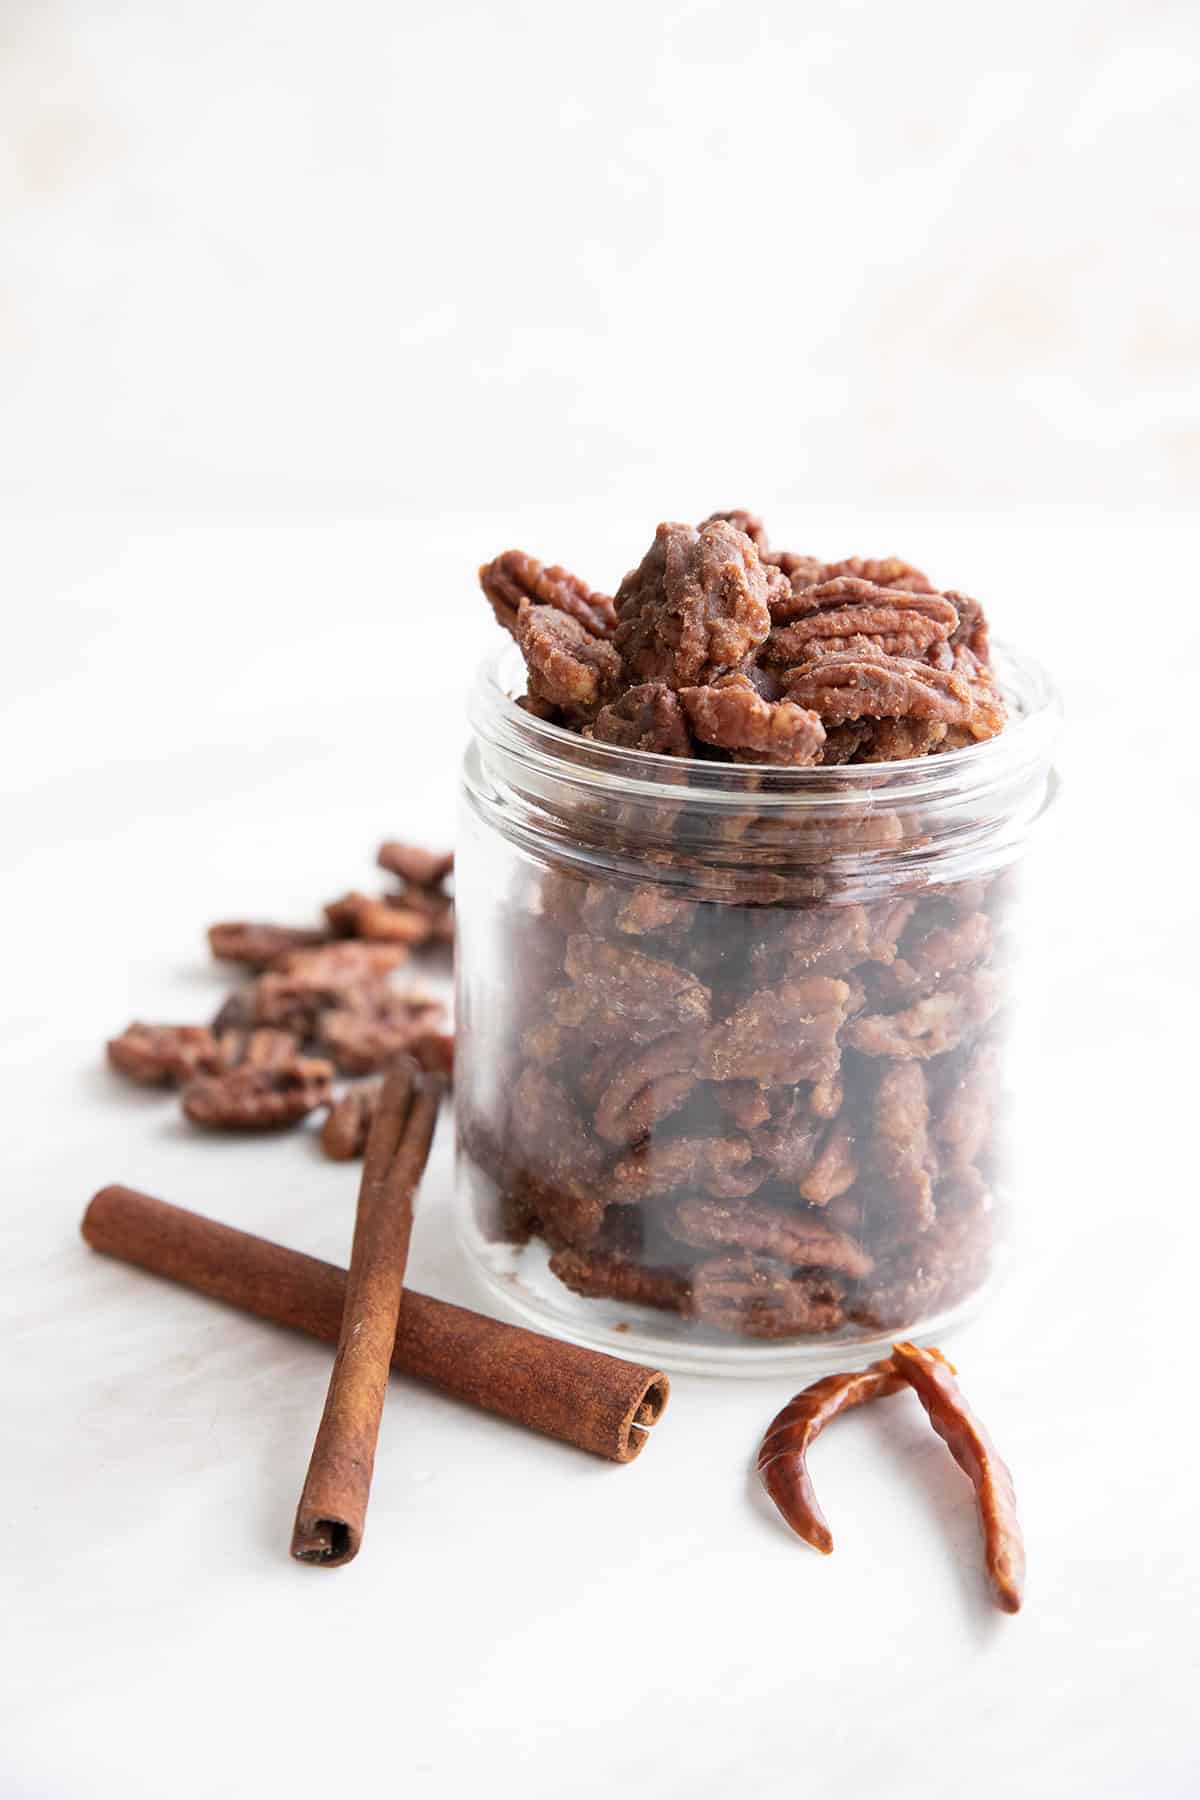 A jar of keto candied pecans with cinnamon sticks and dried chilis in front.